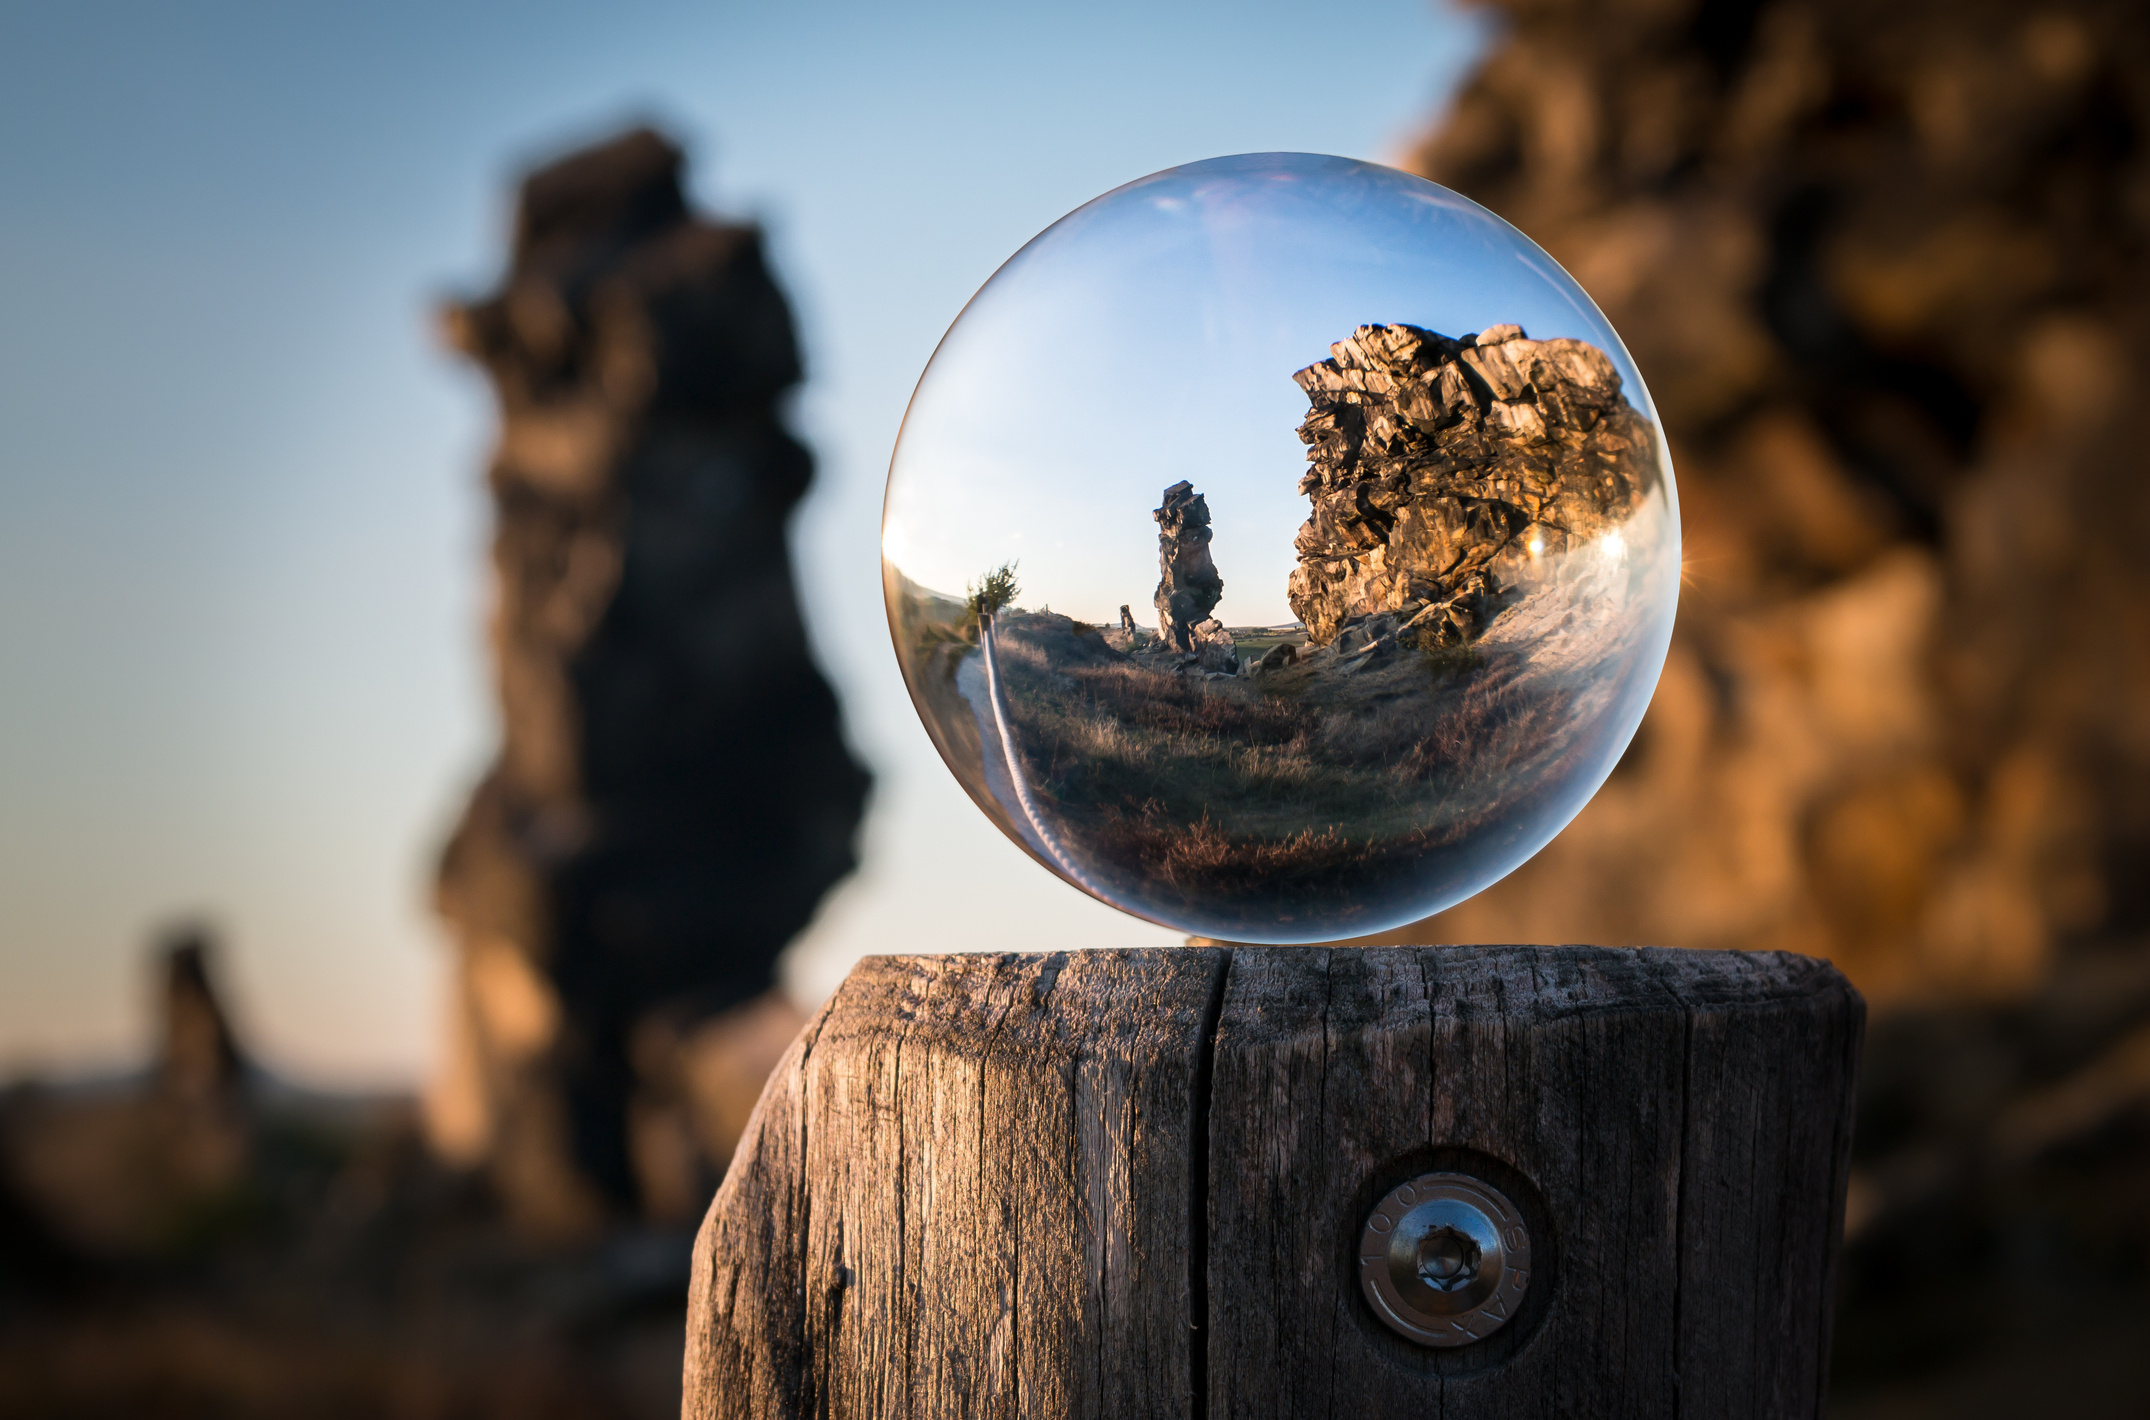 Glass Ball Mirroring the Stone Formations